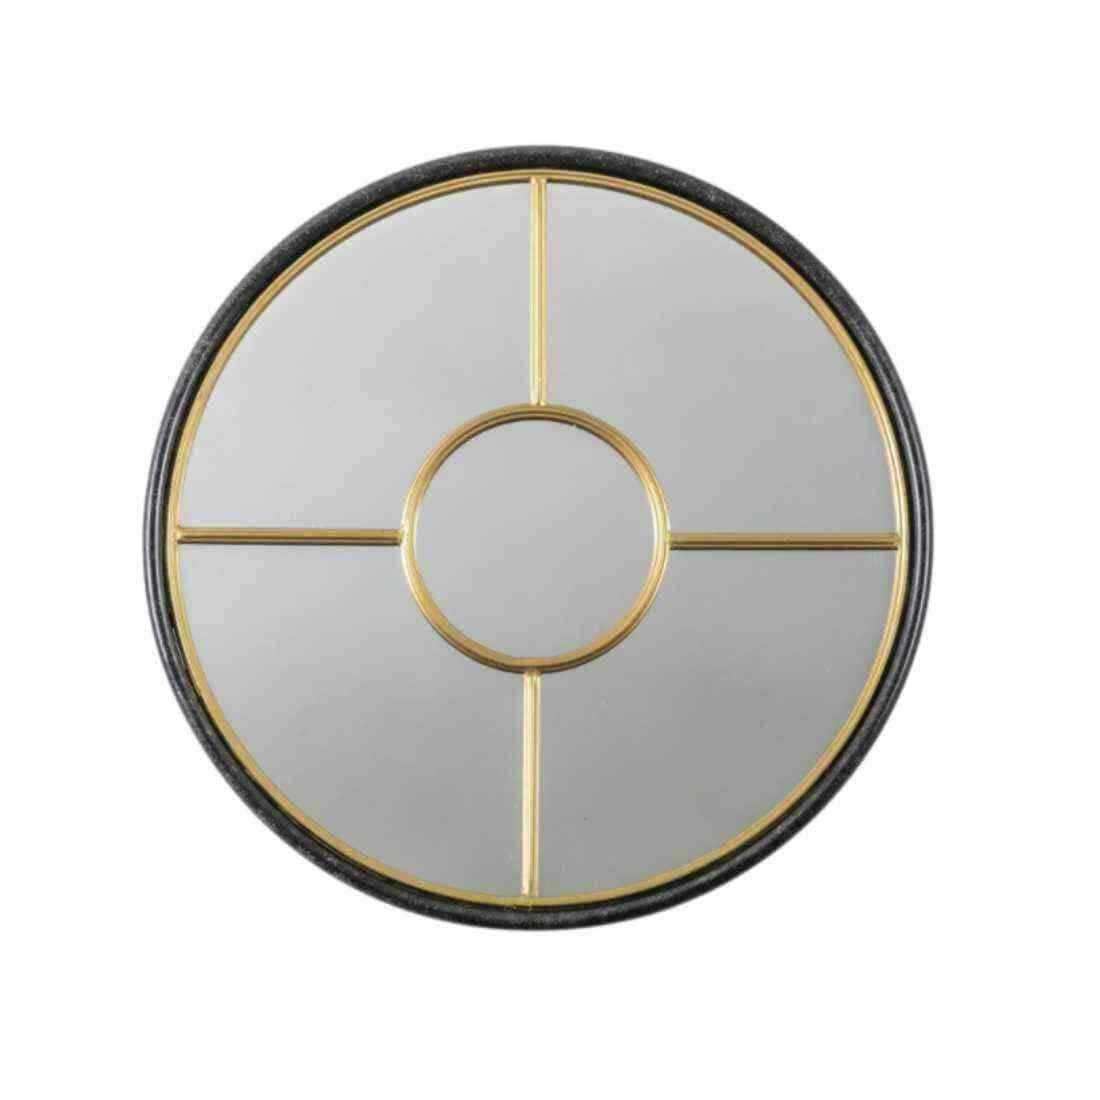 Black and Gold Framed Round Window Mirror - The Farthing